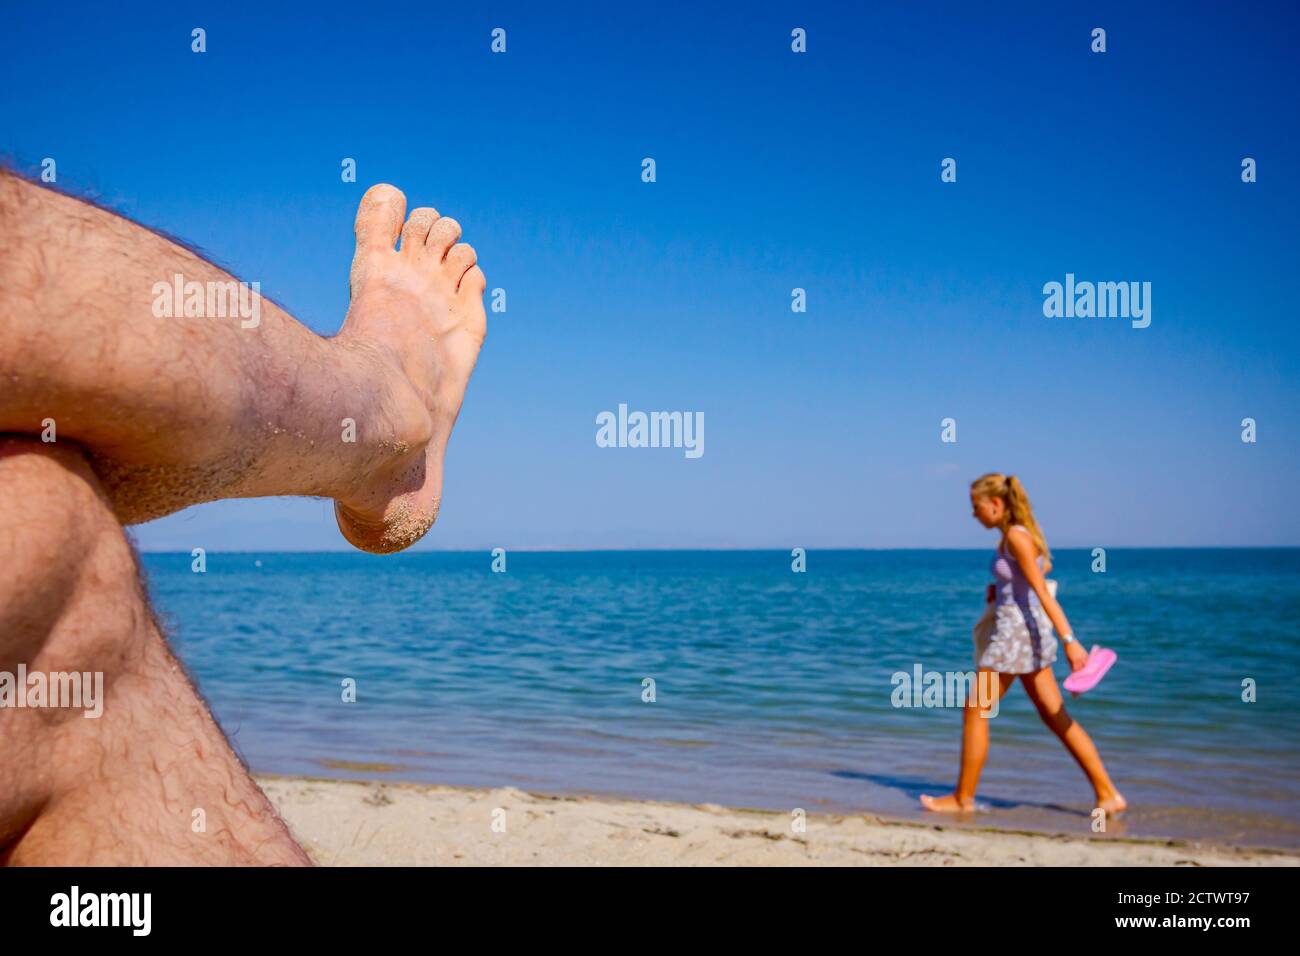 Man's crossed legs are sunbathing by lying carefree on sand next to the coastline, on public beach. Stock Photo